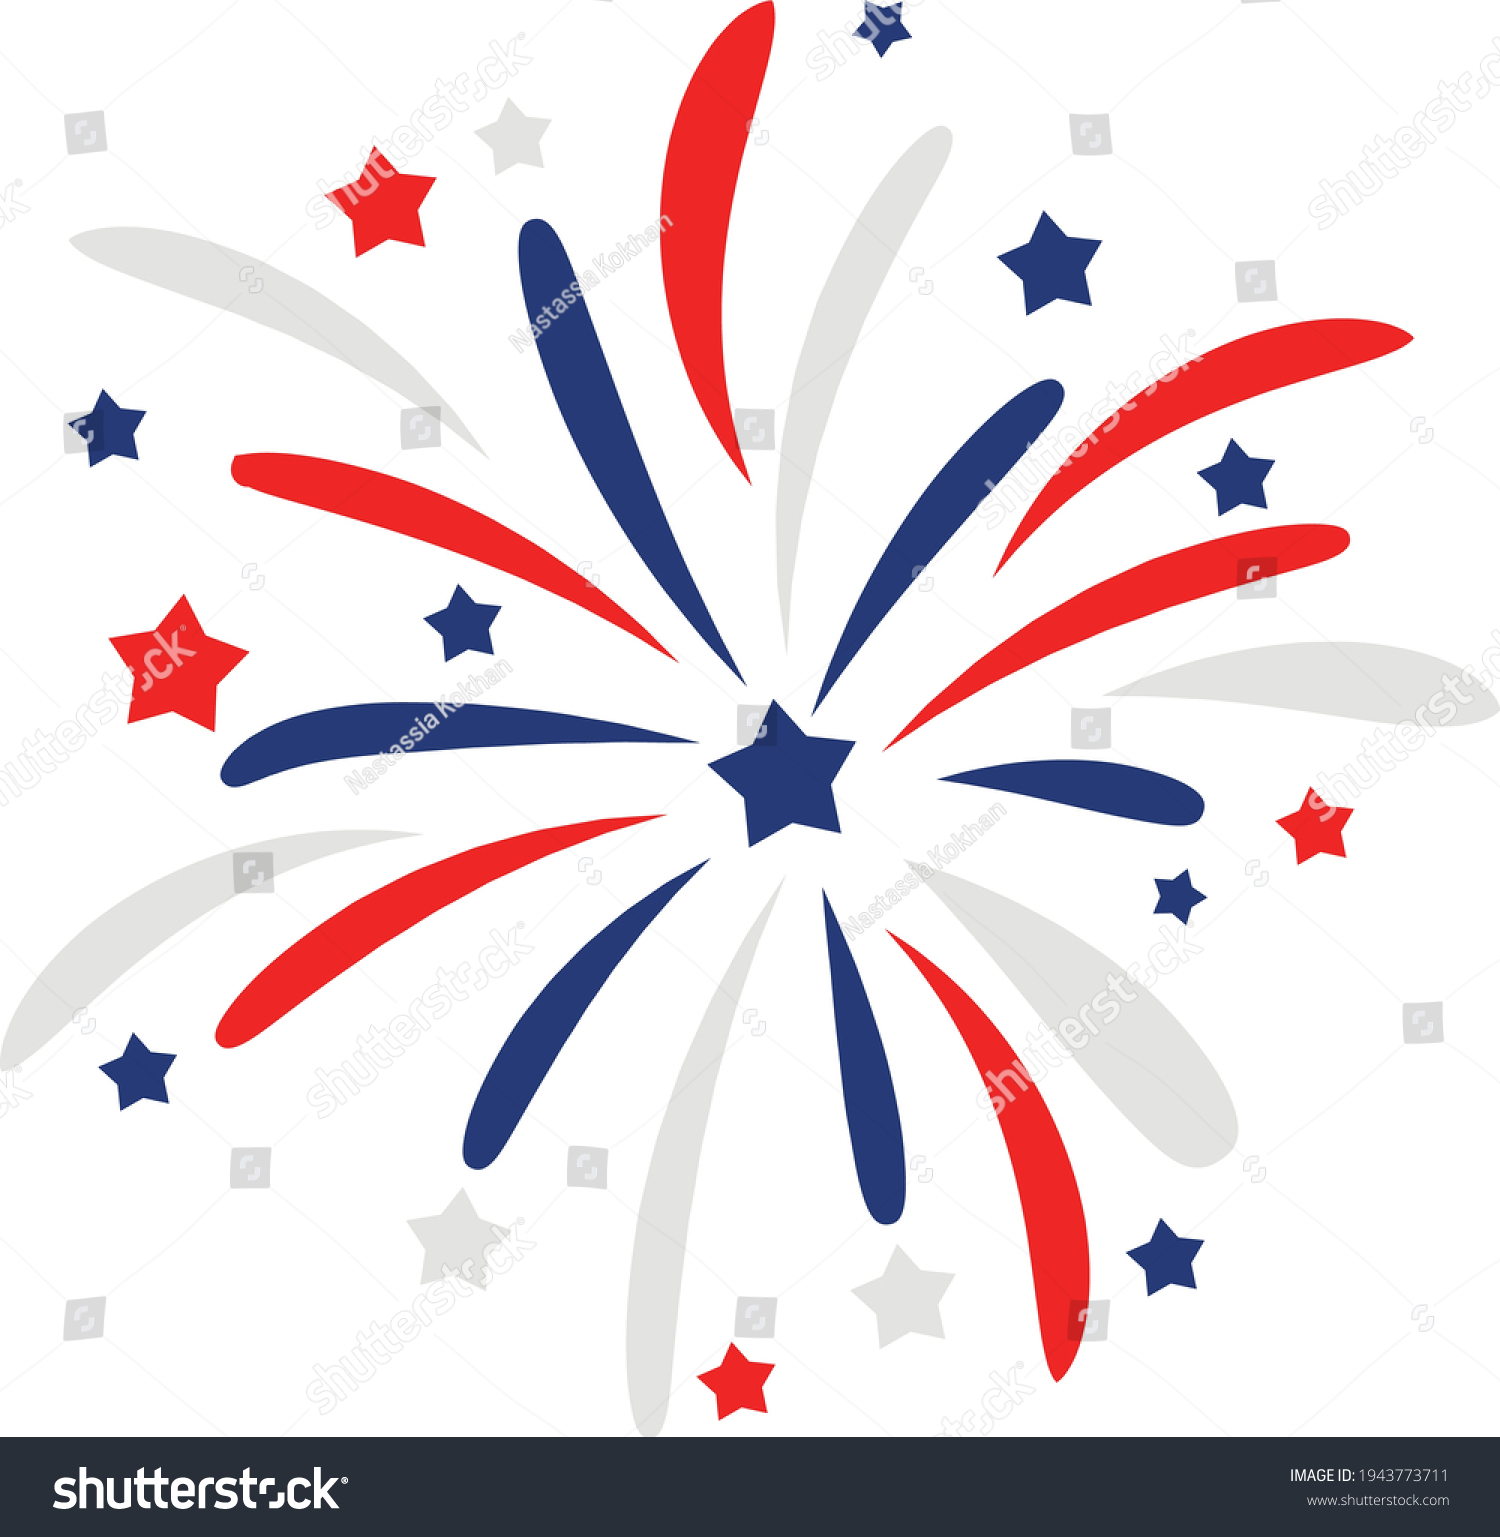 SVG of 4th of July Svg vector Illustration isolated on white background. Independence day party decor. 4th of July fireworks svg for design shirt and scrapbooking.Red blue and white Fireworks with stars. svg